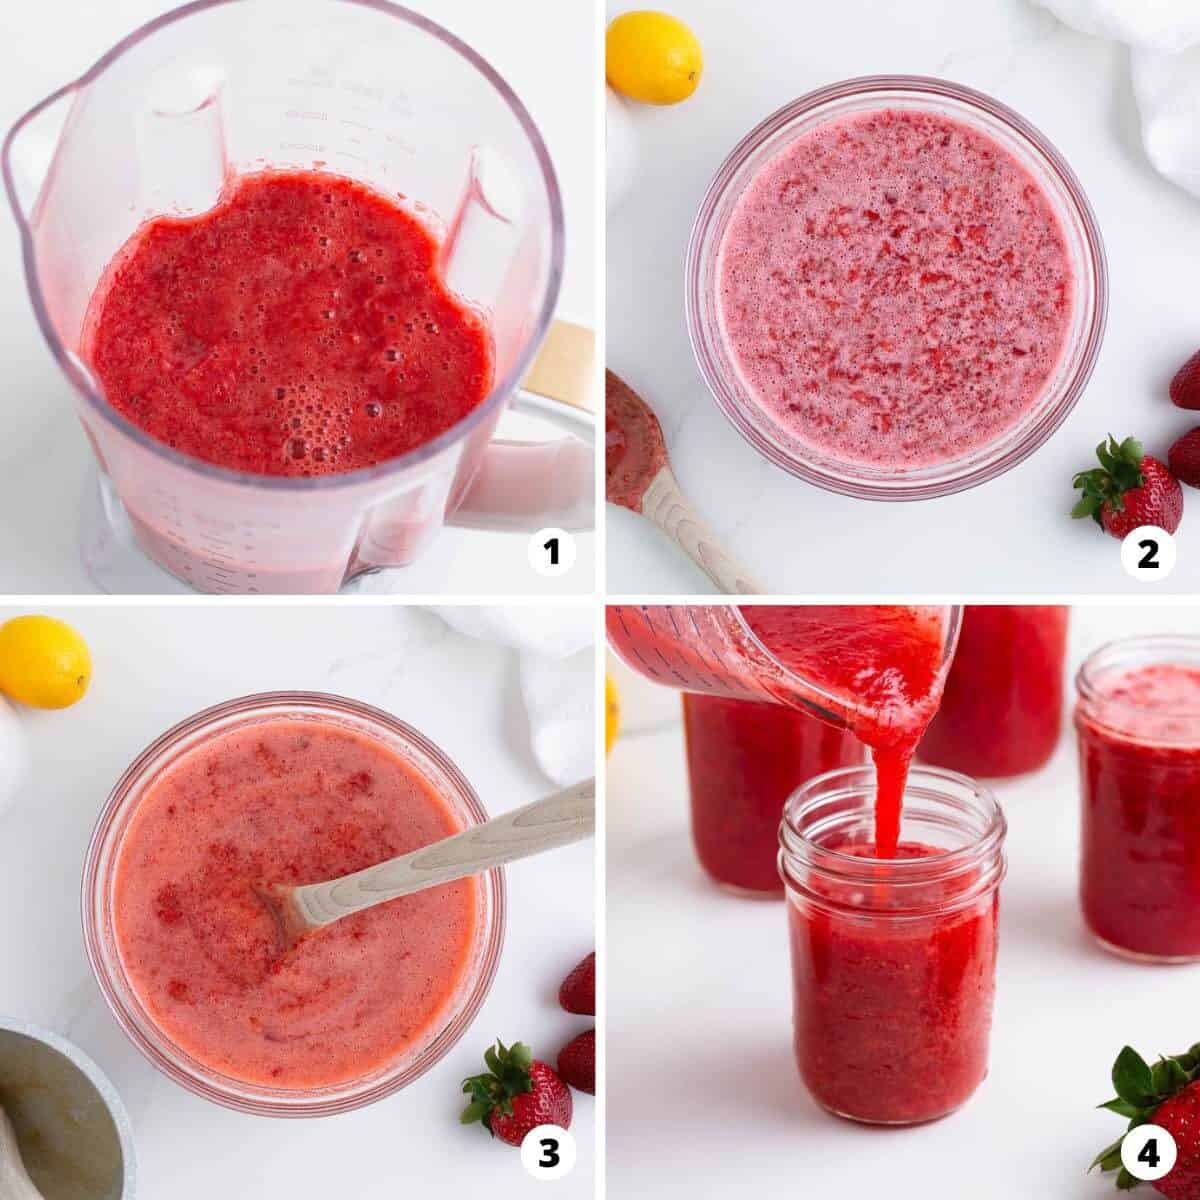 Showing how to make strawberry jam in a 4 step collage.